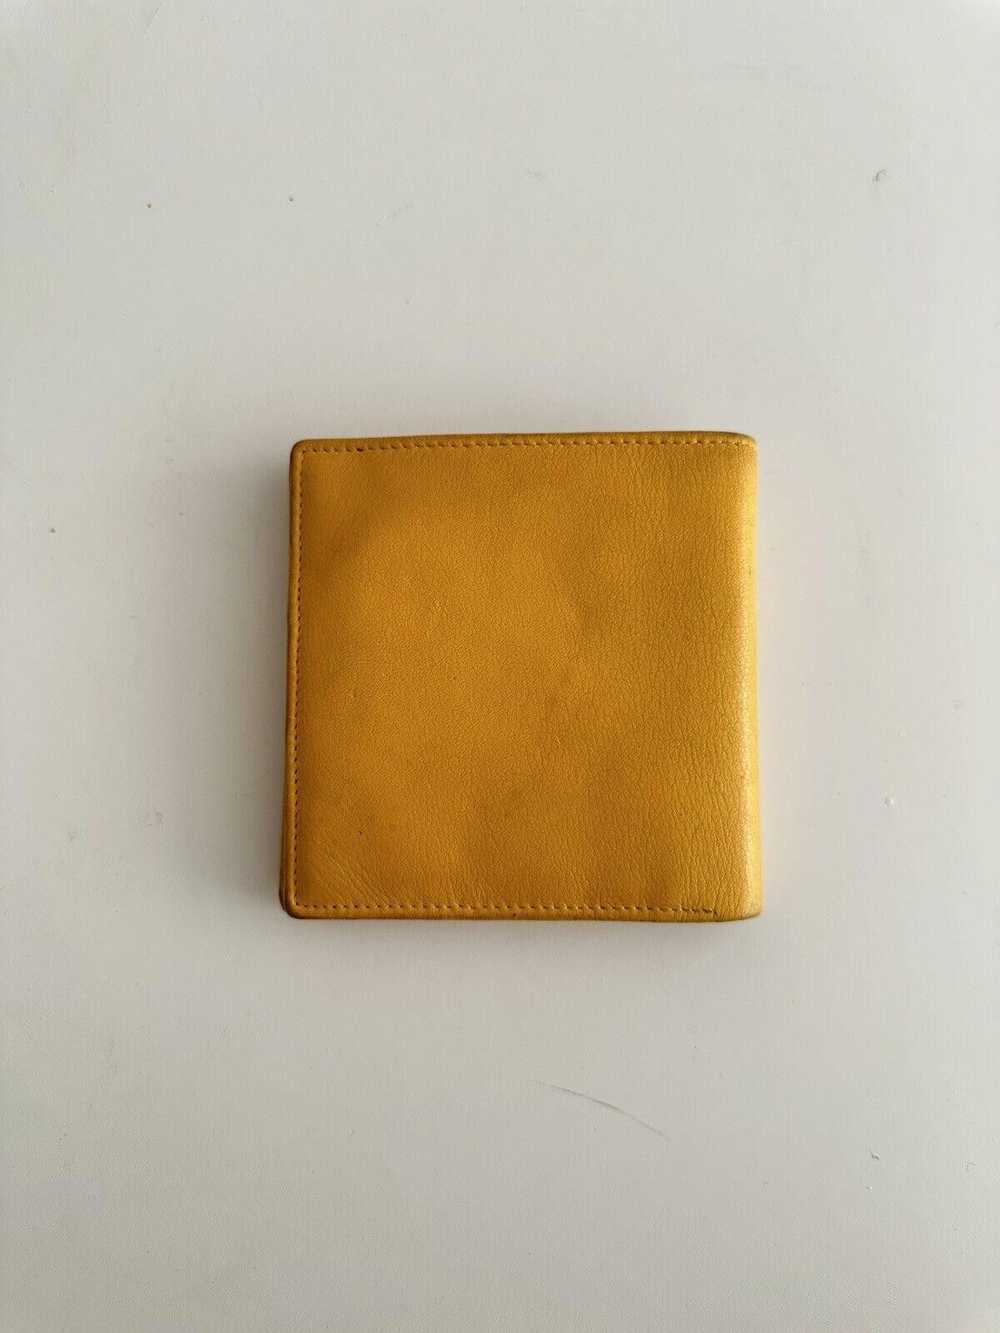 Dior christian dior yellow leather wallet - image 4